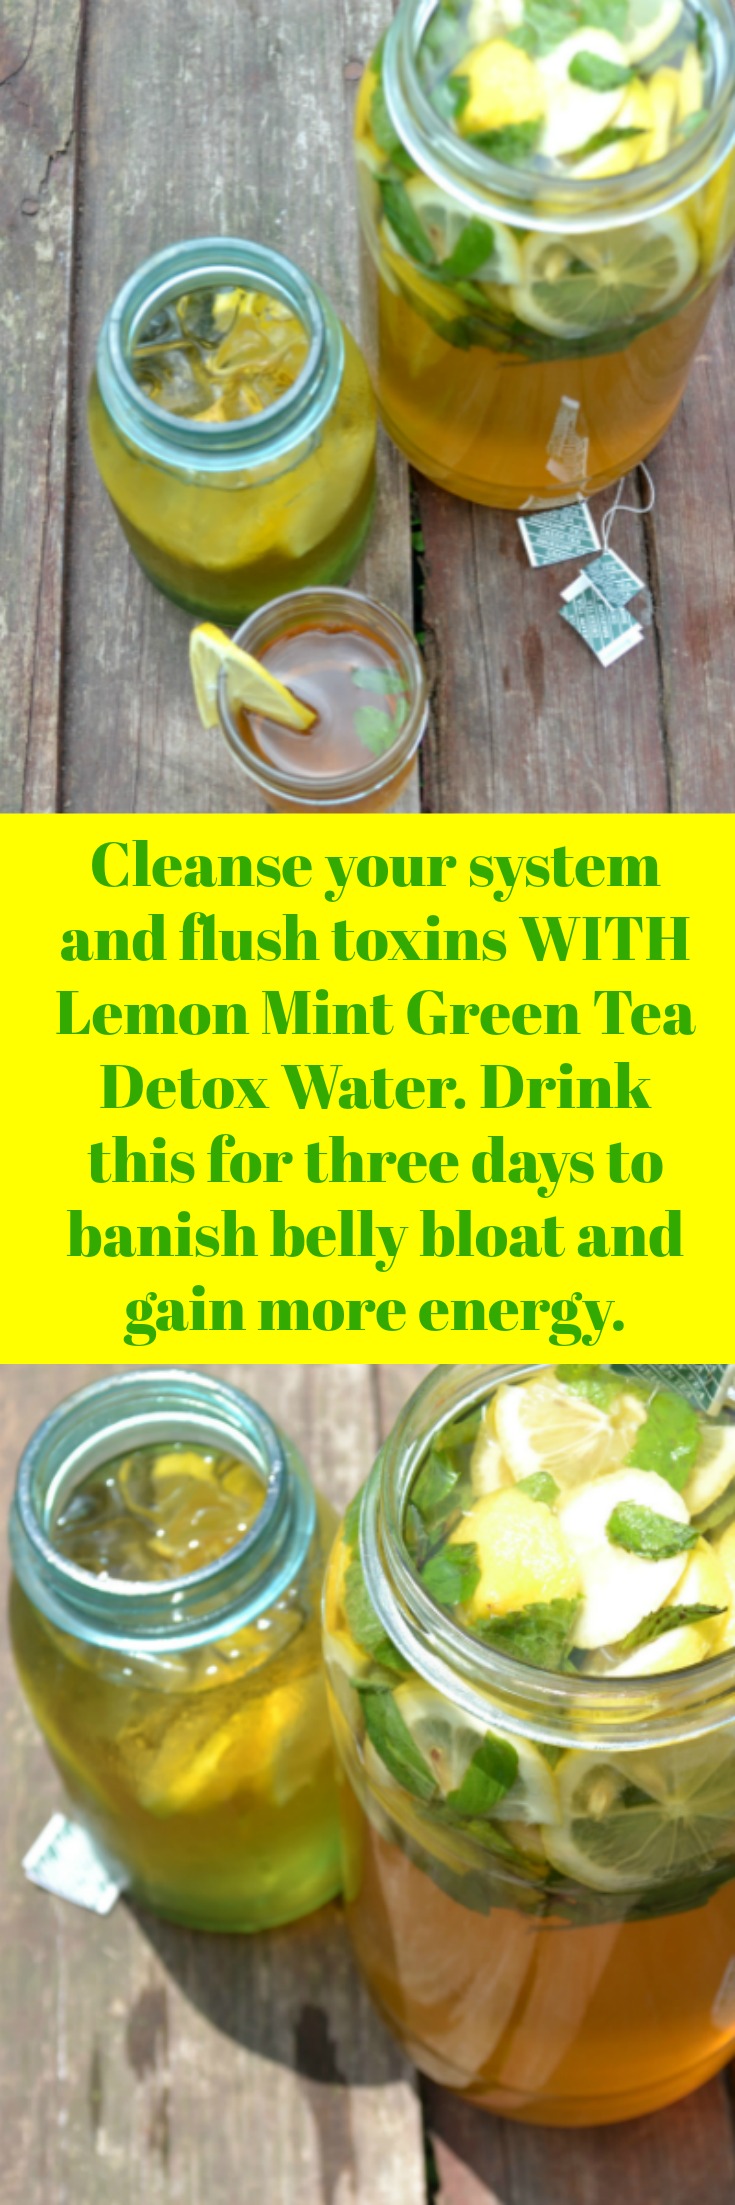 How to lose Belly Bloat! Drink <strong>Green Tea Lemon Mint Detox Water for Cleansing</strong> and to help banish your belly bloat. Drink first thing in the morning and then again at lunch time. Kick start your metabolism and jump start your weight loss goals. You will actually gain more energy and feel amazingly less stressed when you drink more infused water.  We love homemade weight loss detox drinks!